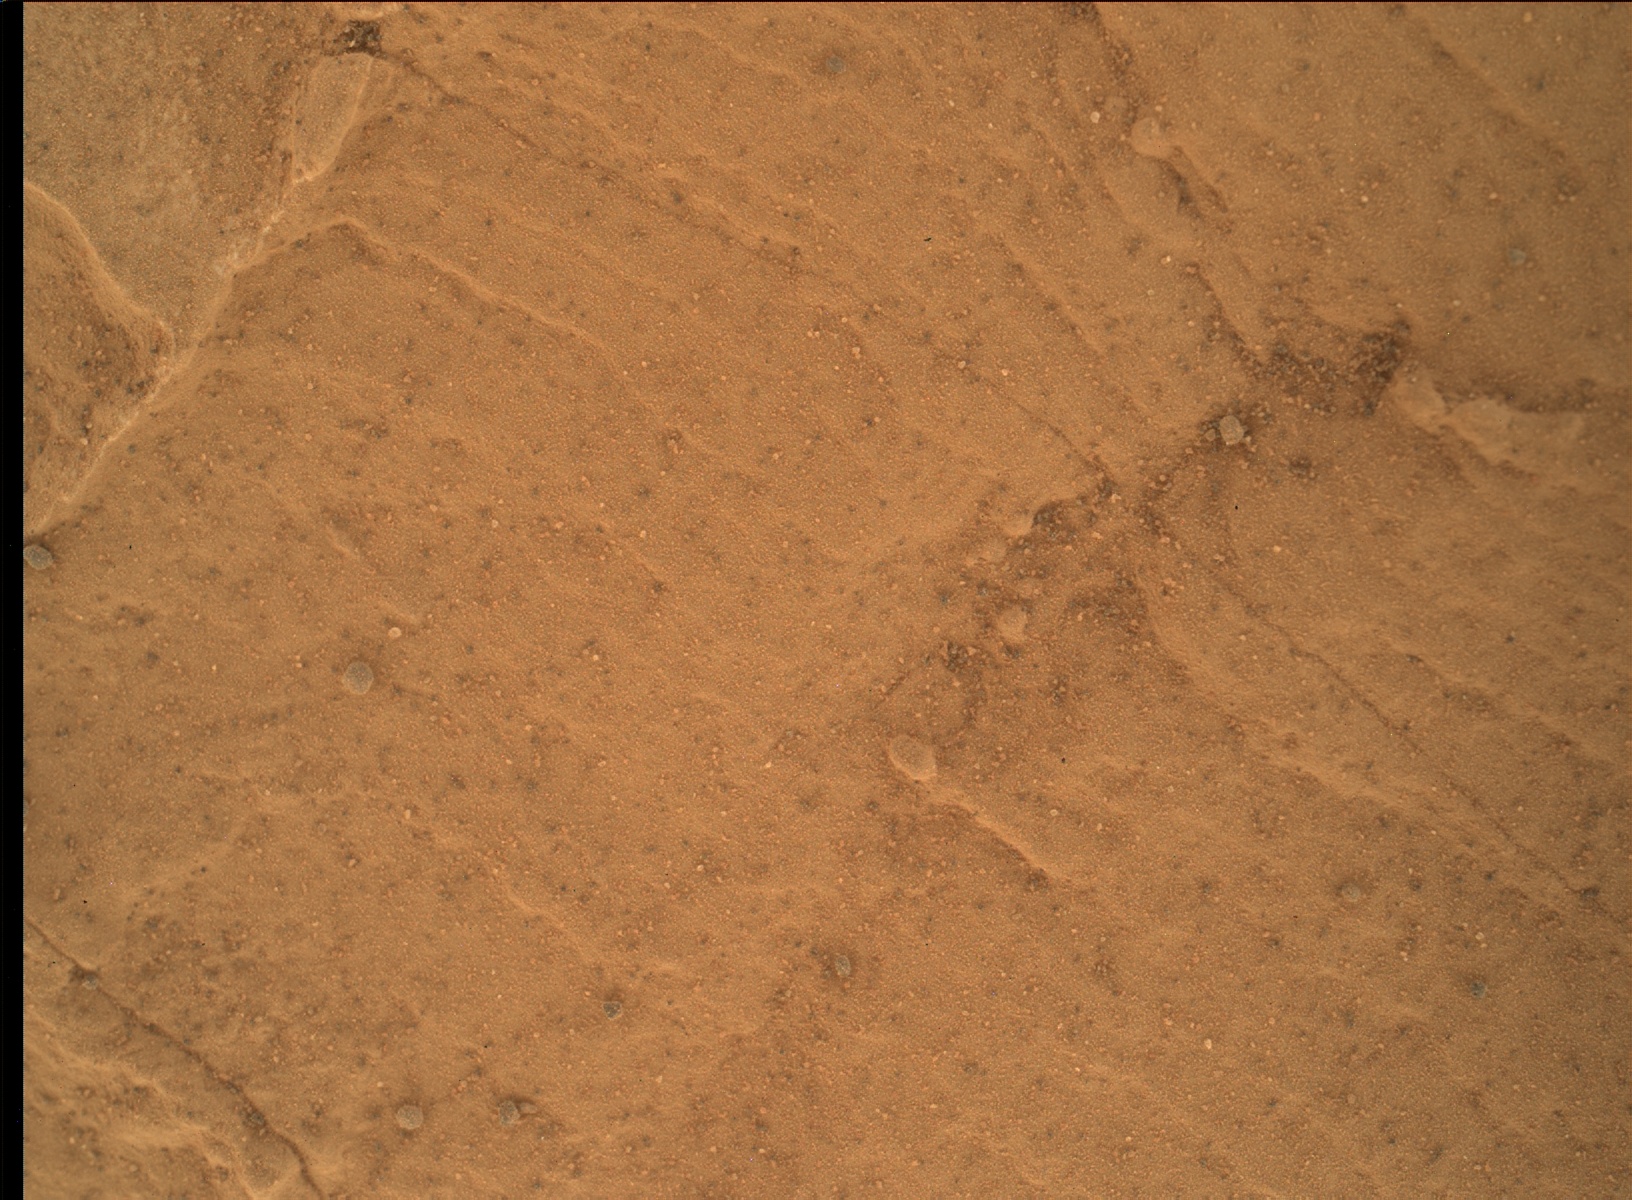 Nasa's Mars rover Curiosity acquired this image using its Mars Hand Lens Imager (MAHLI) on Sol 1721